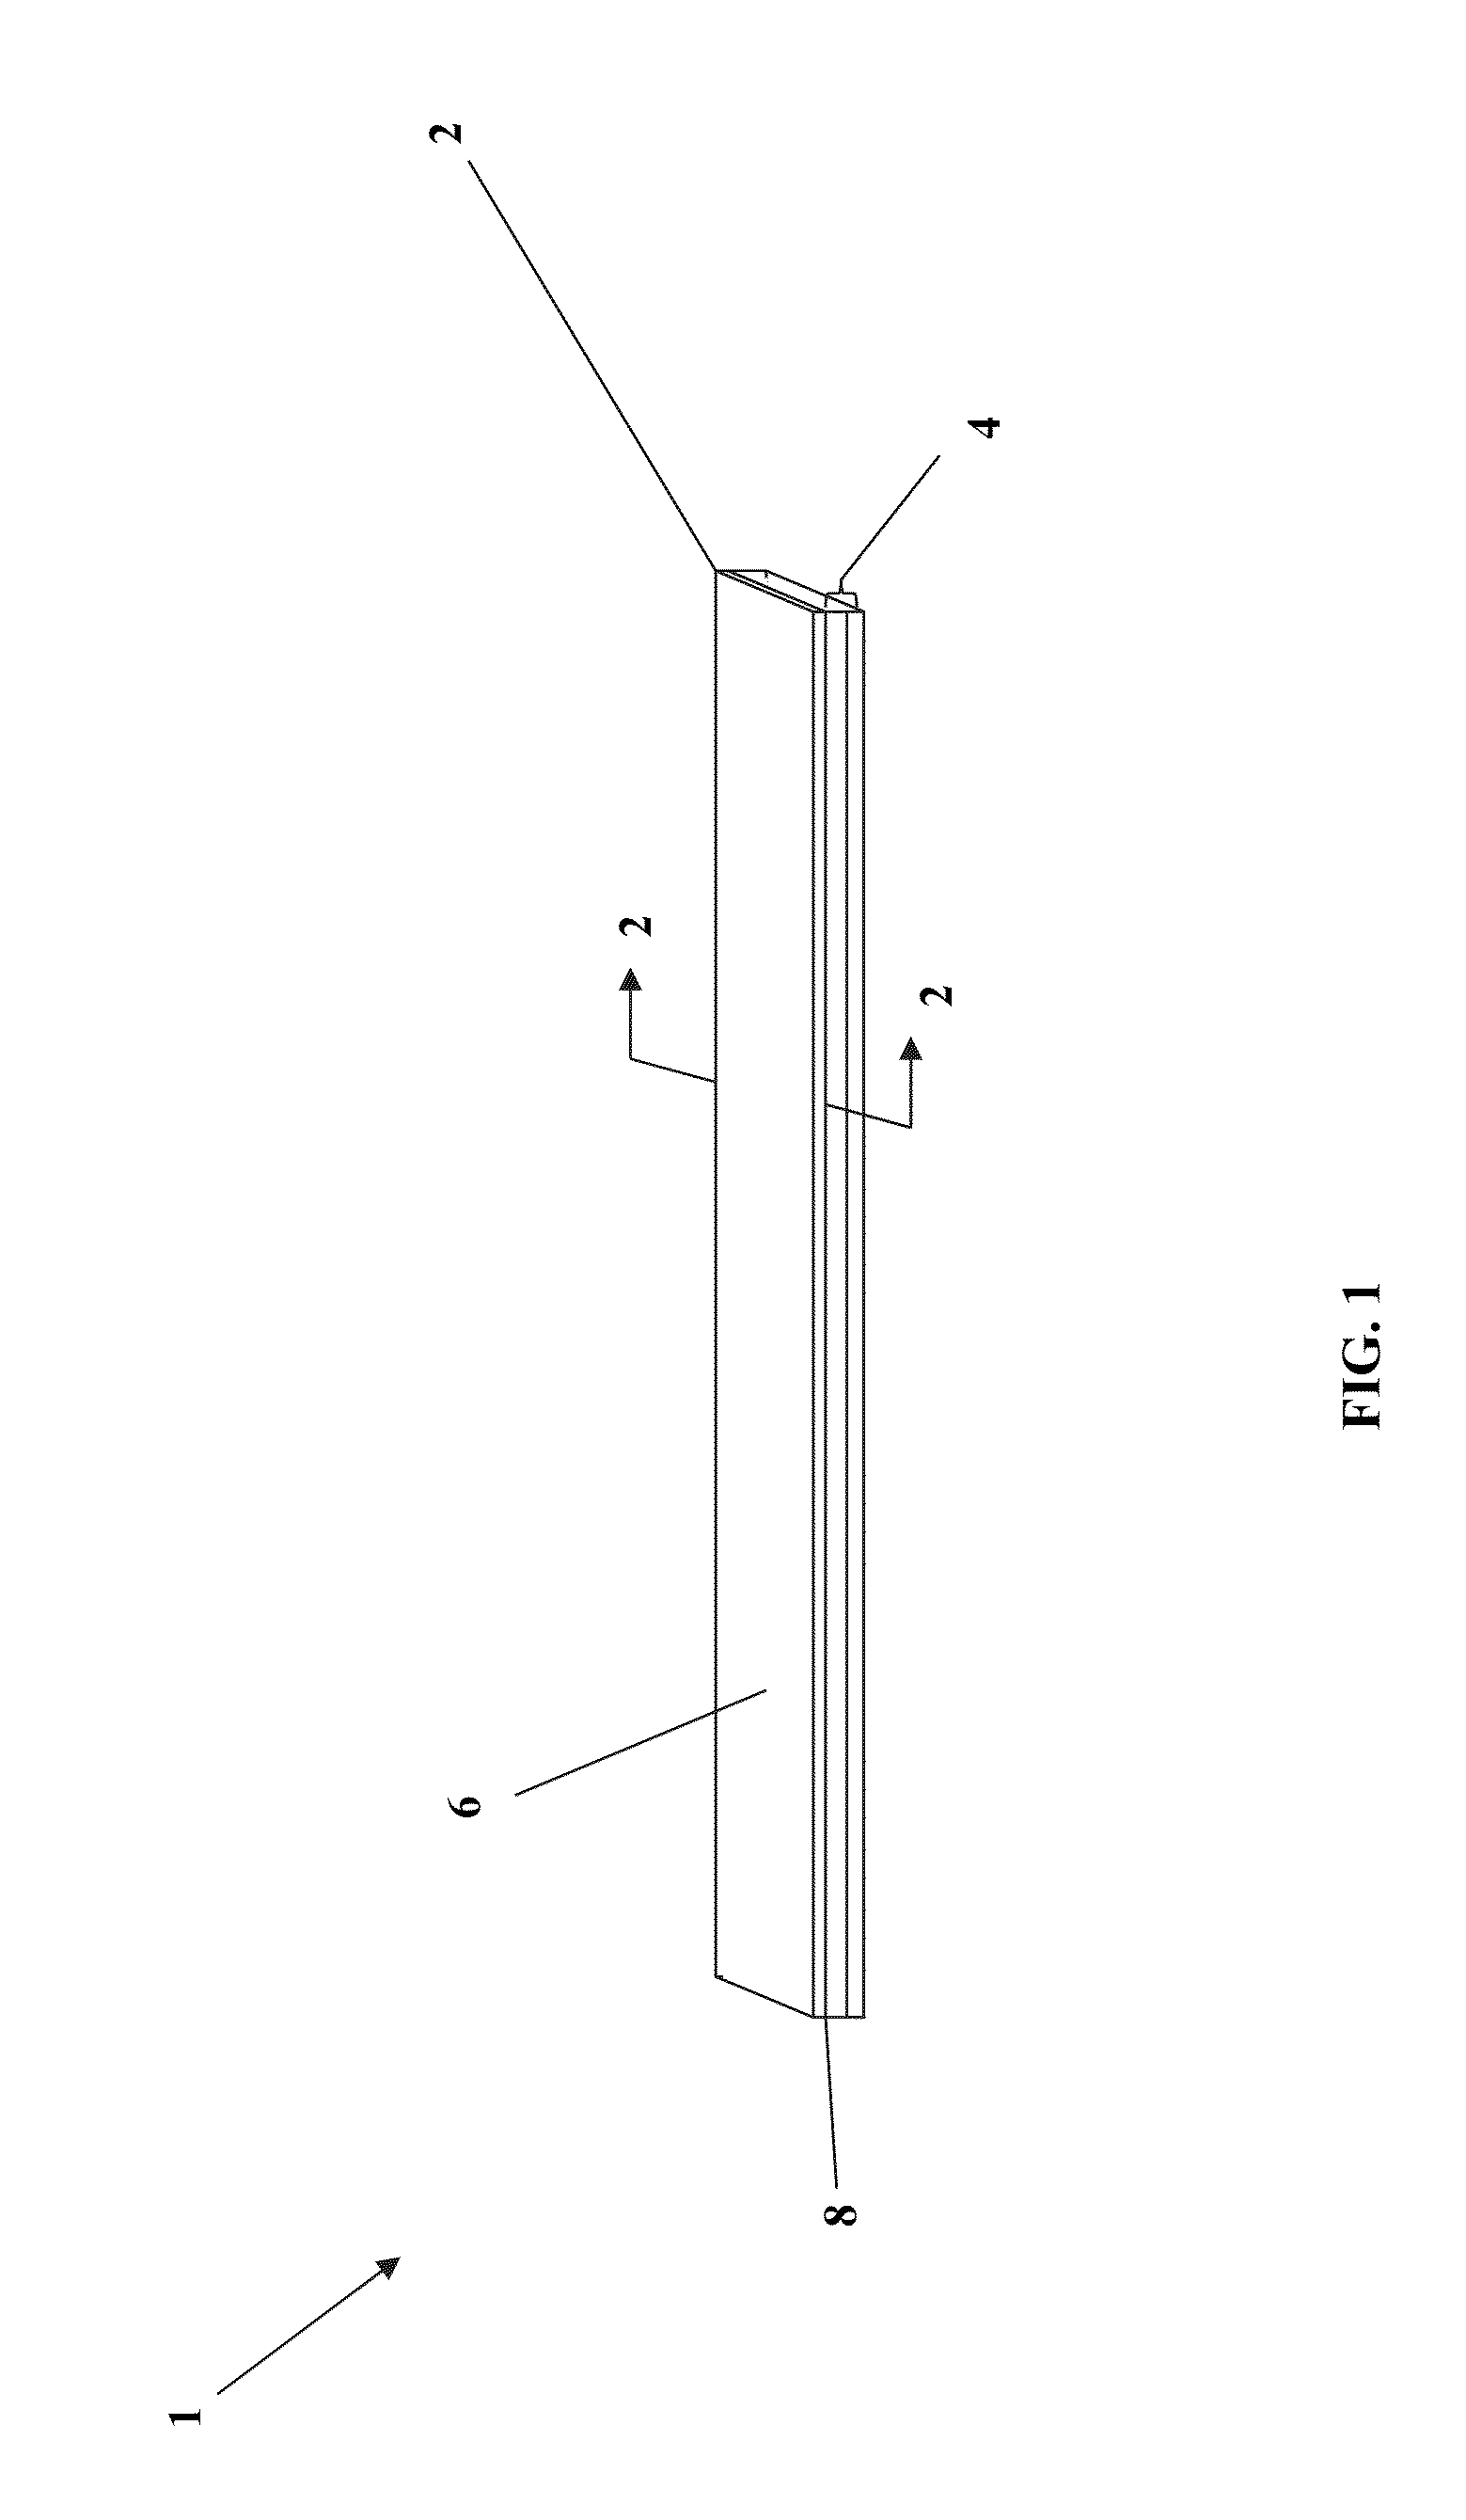 Multi-layer acoustical flooring tile and method of manufacture